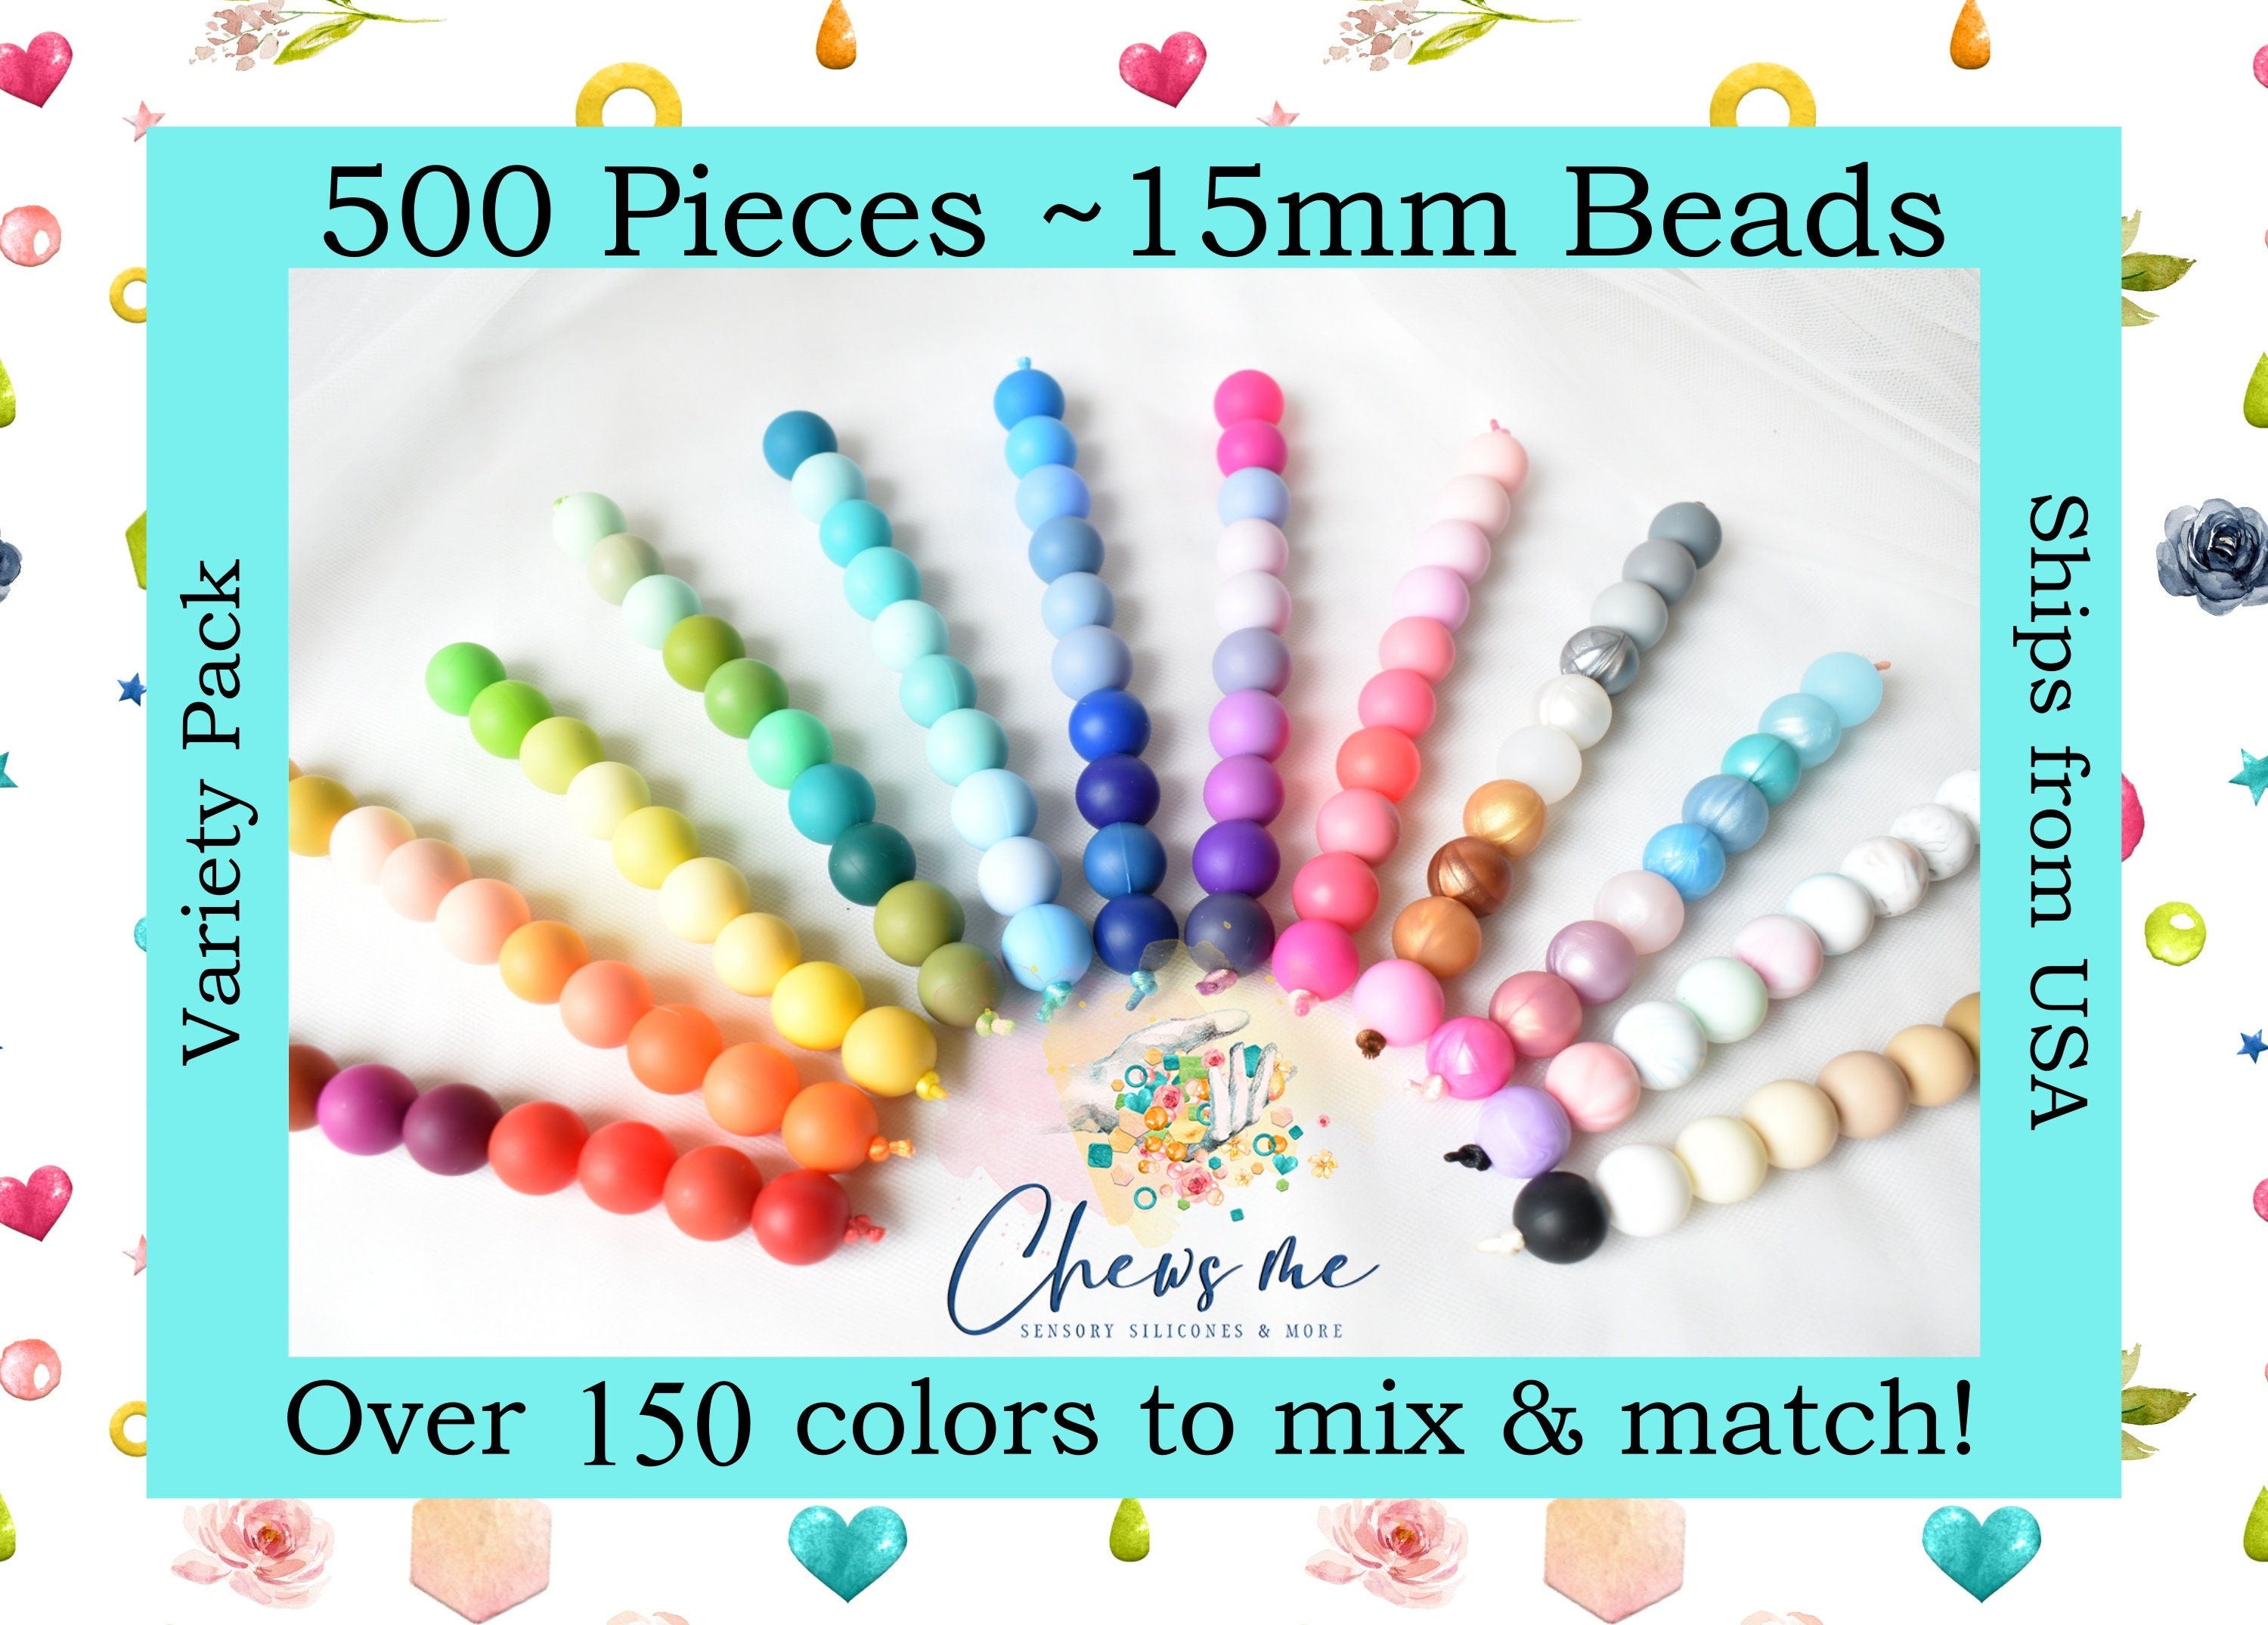 Assorted Colored Silicone Beads for Making Keychains Pen Bracelets Wristlet  Lanyard Craft Including Focal Beads, Round Beads, Flat Space